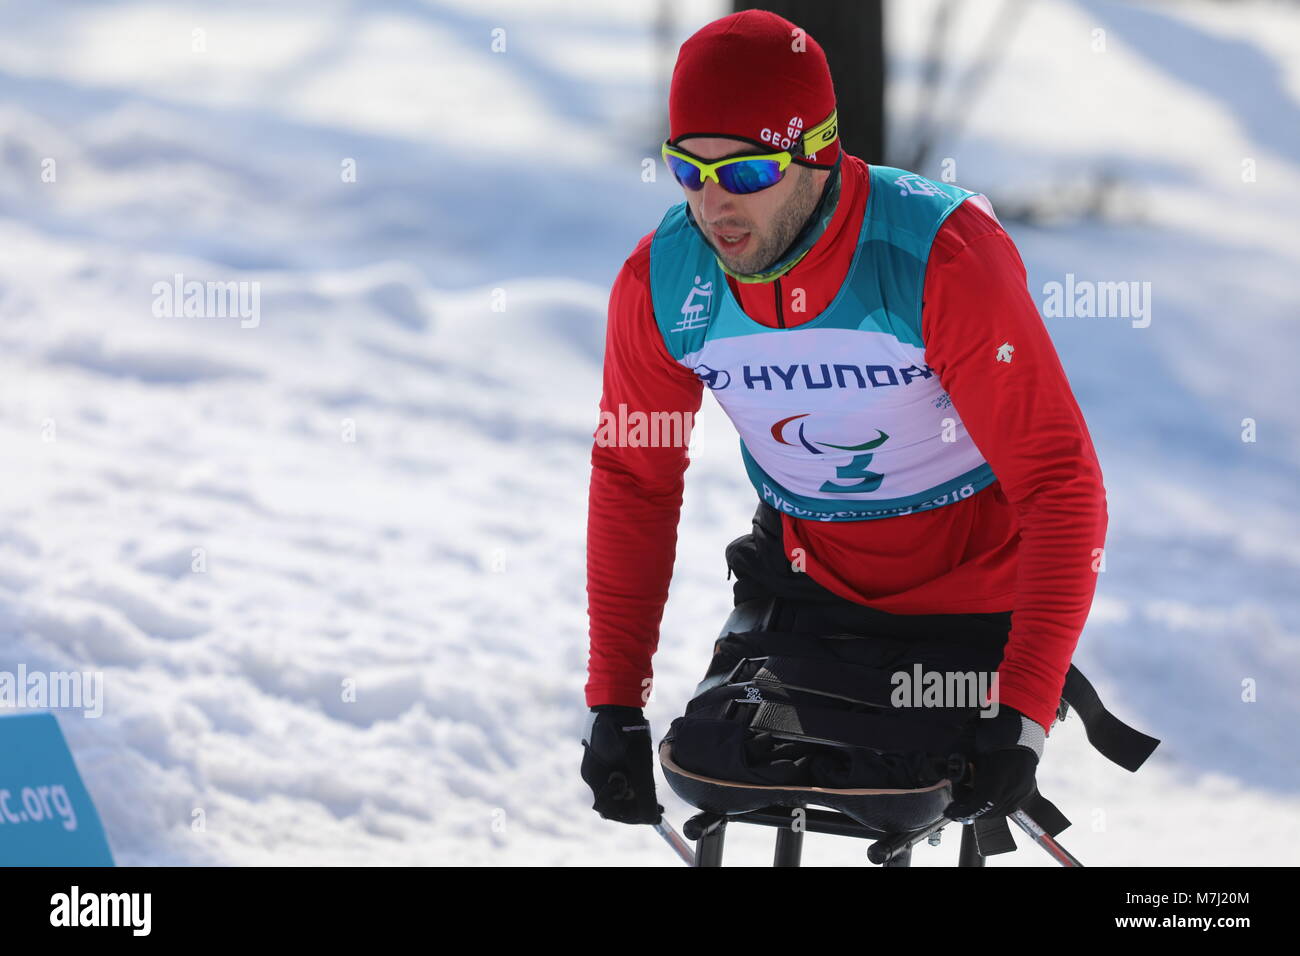 Pyeongchang, South Korea. 11th Mar, 2018. Temuri Dadiani (DNF) from Georgia seen during the Cross-Country Skiing Men's 15km Sitting. Dadiani and his country Georgia took part in the Paralympic Games for the first time.The Pyeongchang Paralympics 2018 Games will be held from March 09 until March 18 2018 in Pyeongchang. Credit: Ilona Berezowska/SOPA Images/ZUMA Wire/Alamy Live News Stock Photo